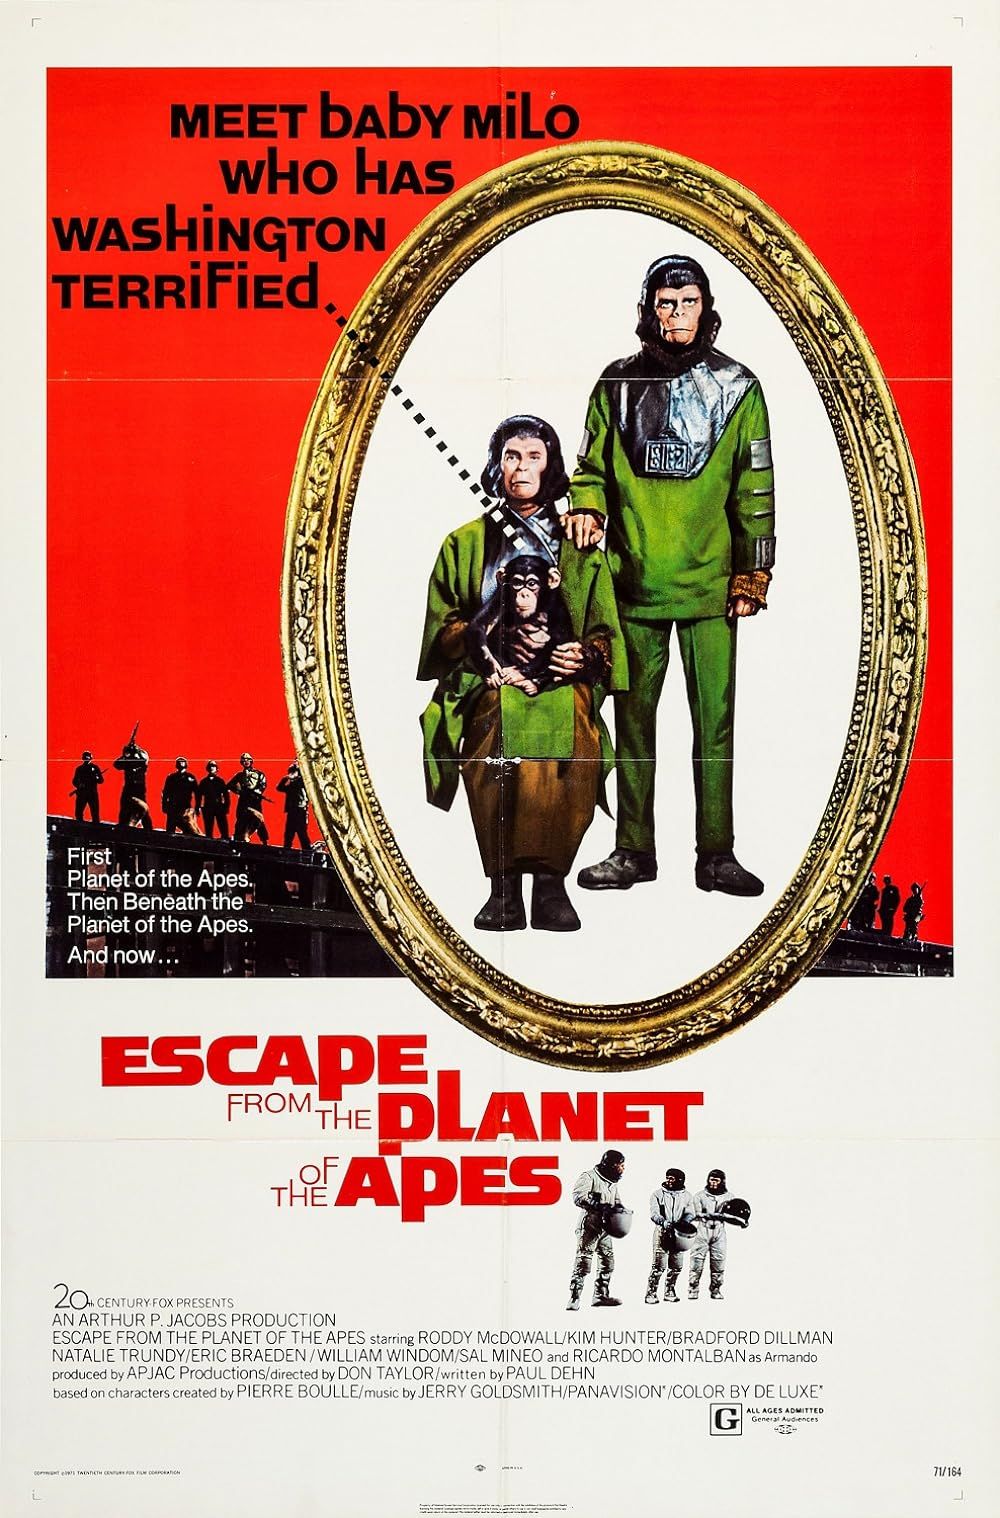 Cornelious and Zida hold a chimpanzee wearing green outfits in Escape from the Planet of the Apes.